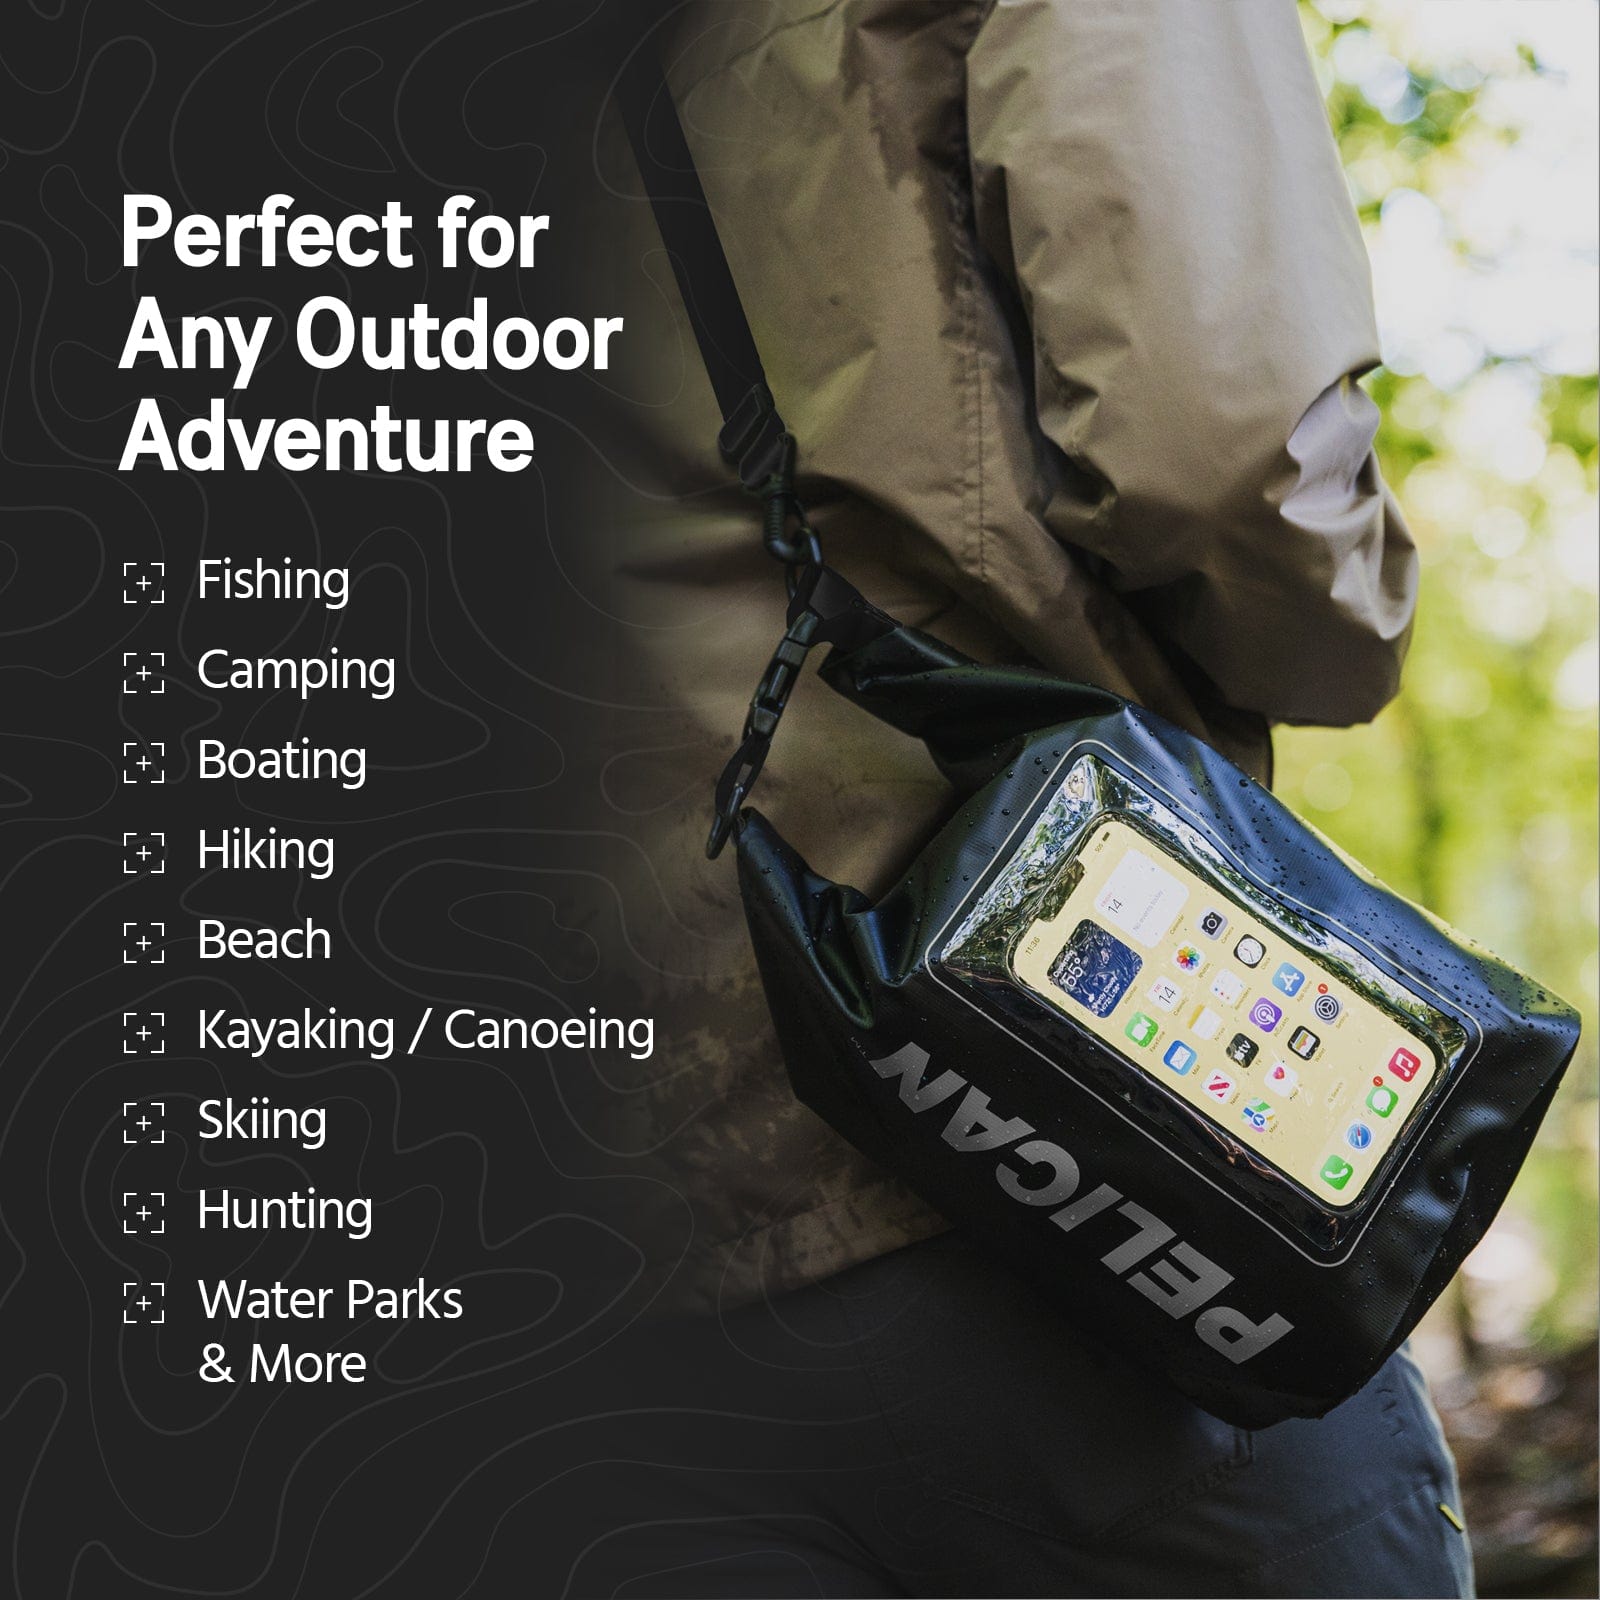 Perfect for any outdoor adventure: fishing, camping, boating, hiking, beach, kayaking/canoeing, skiing, hunting, water parks and more